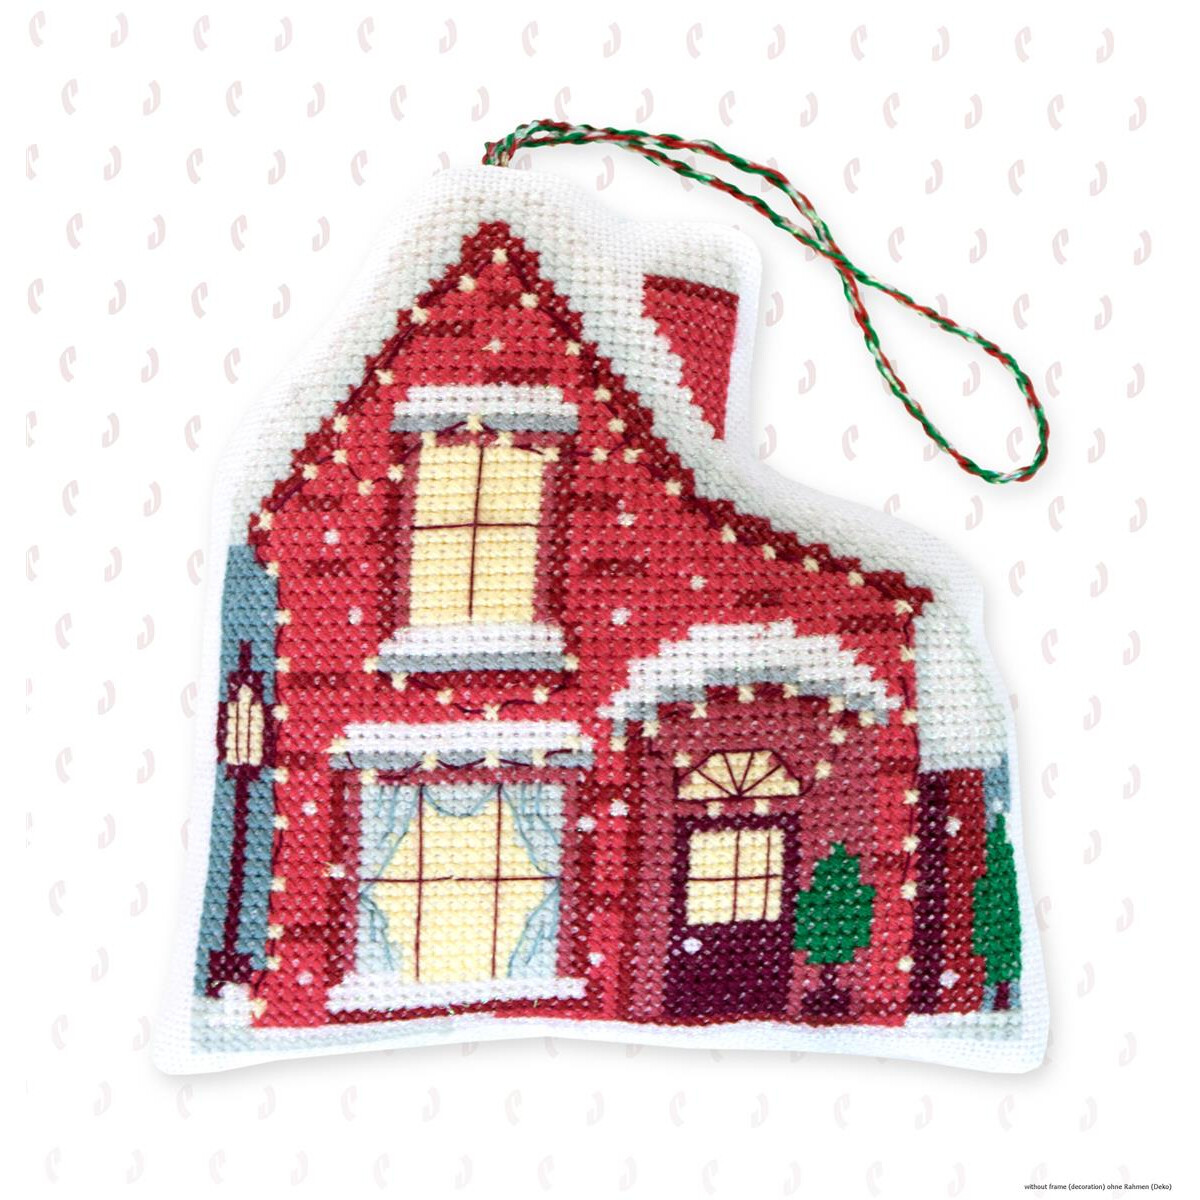 A cross stitch ornament from a Luca-s embroidery pack...